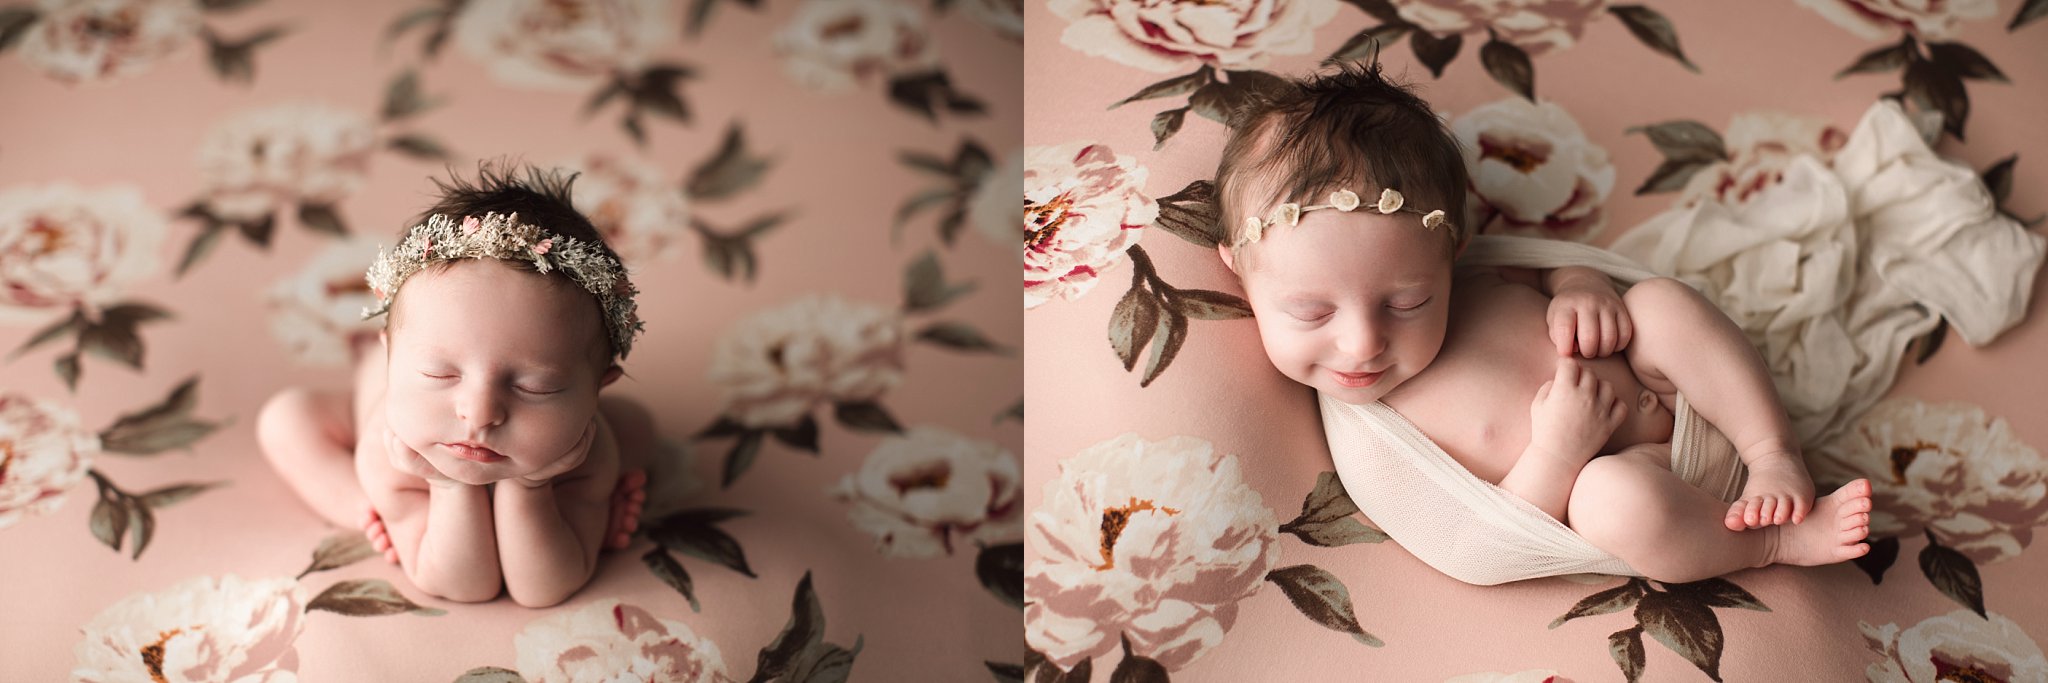 newborn baby girl photographed on floral blanket froggy pose and swaddled with smile